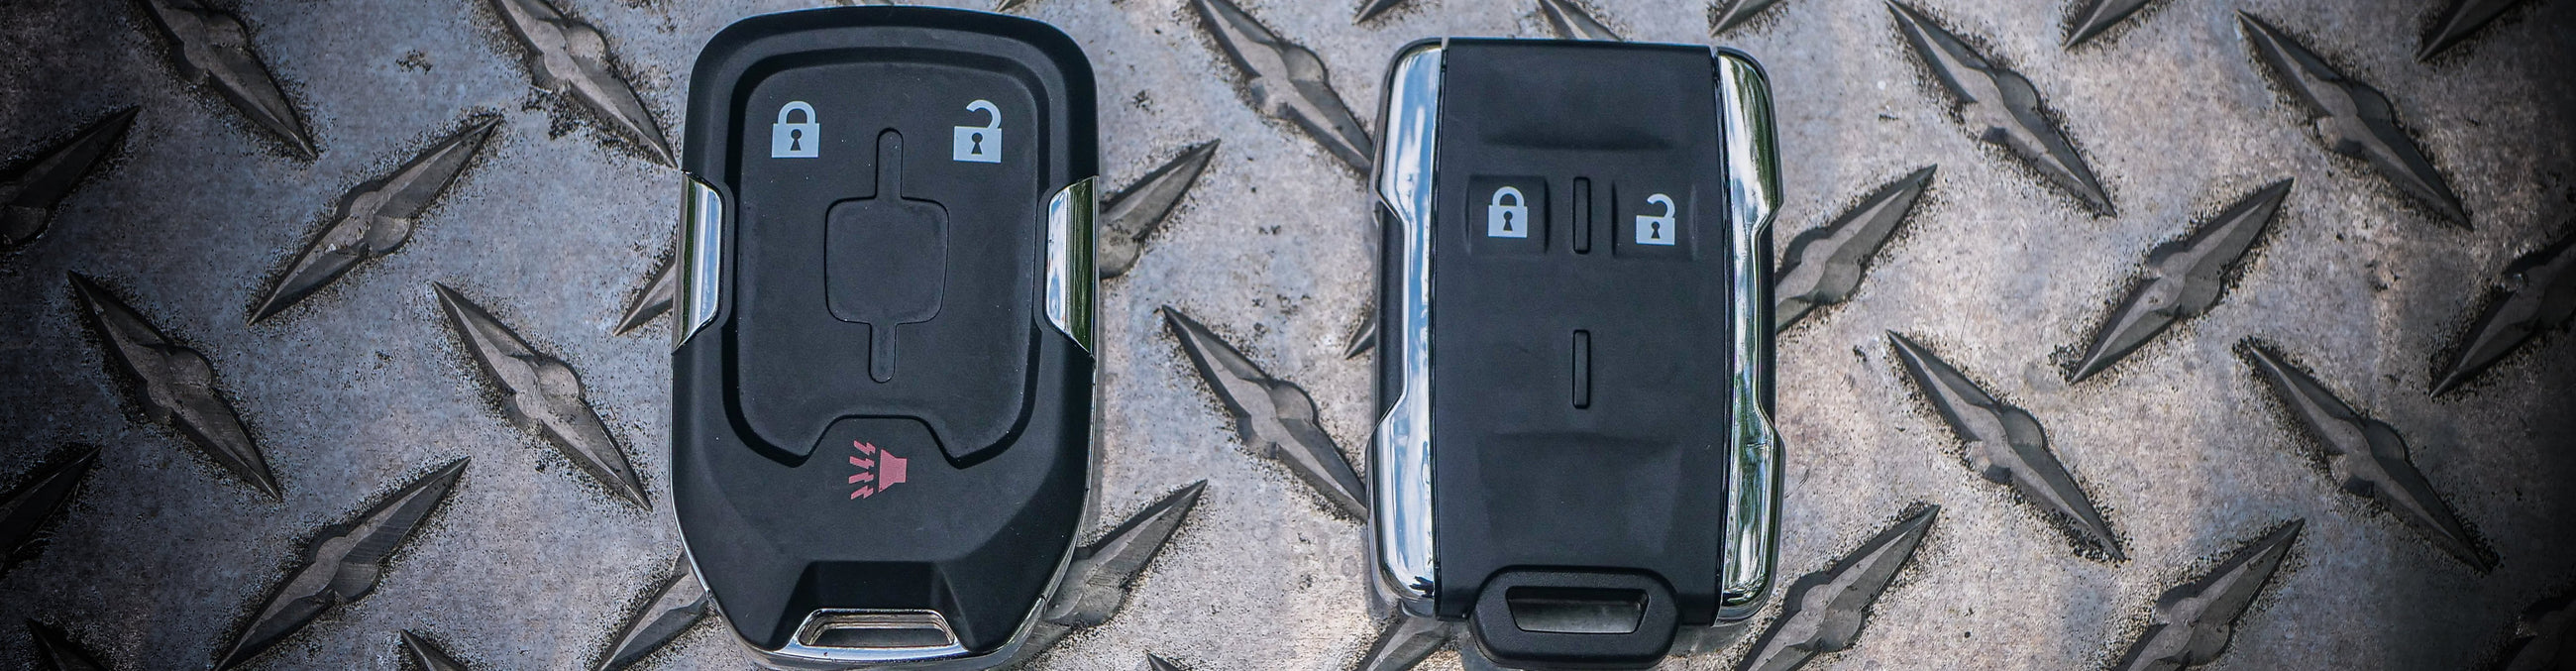 Chevy and GMC 2020 & 2015 Style Retrofit Key Fobs (1993-2019)